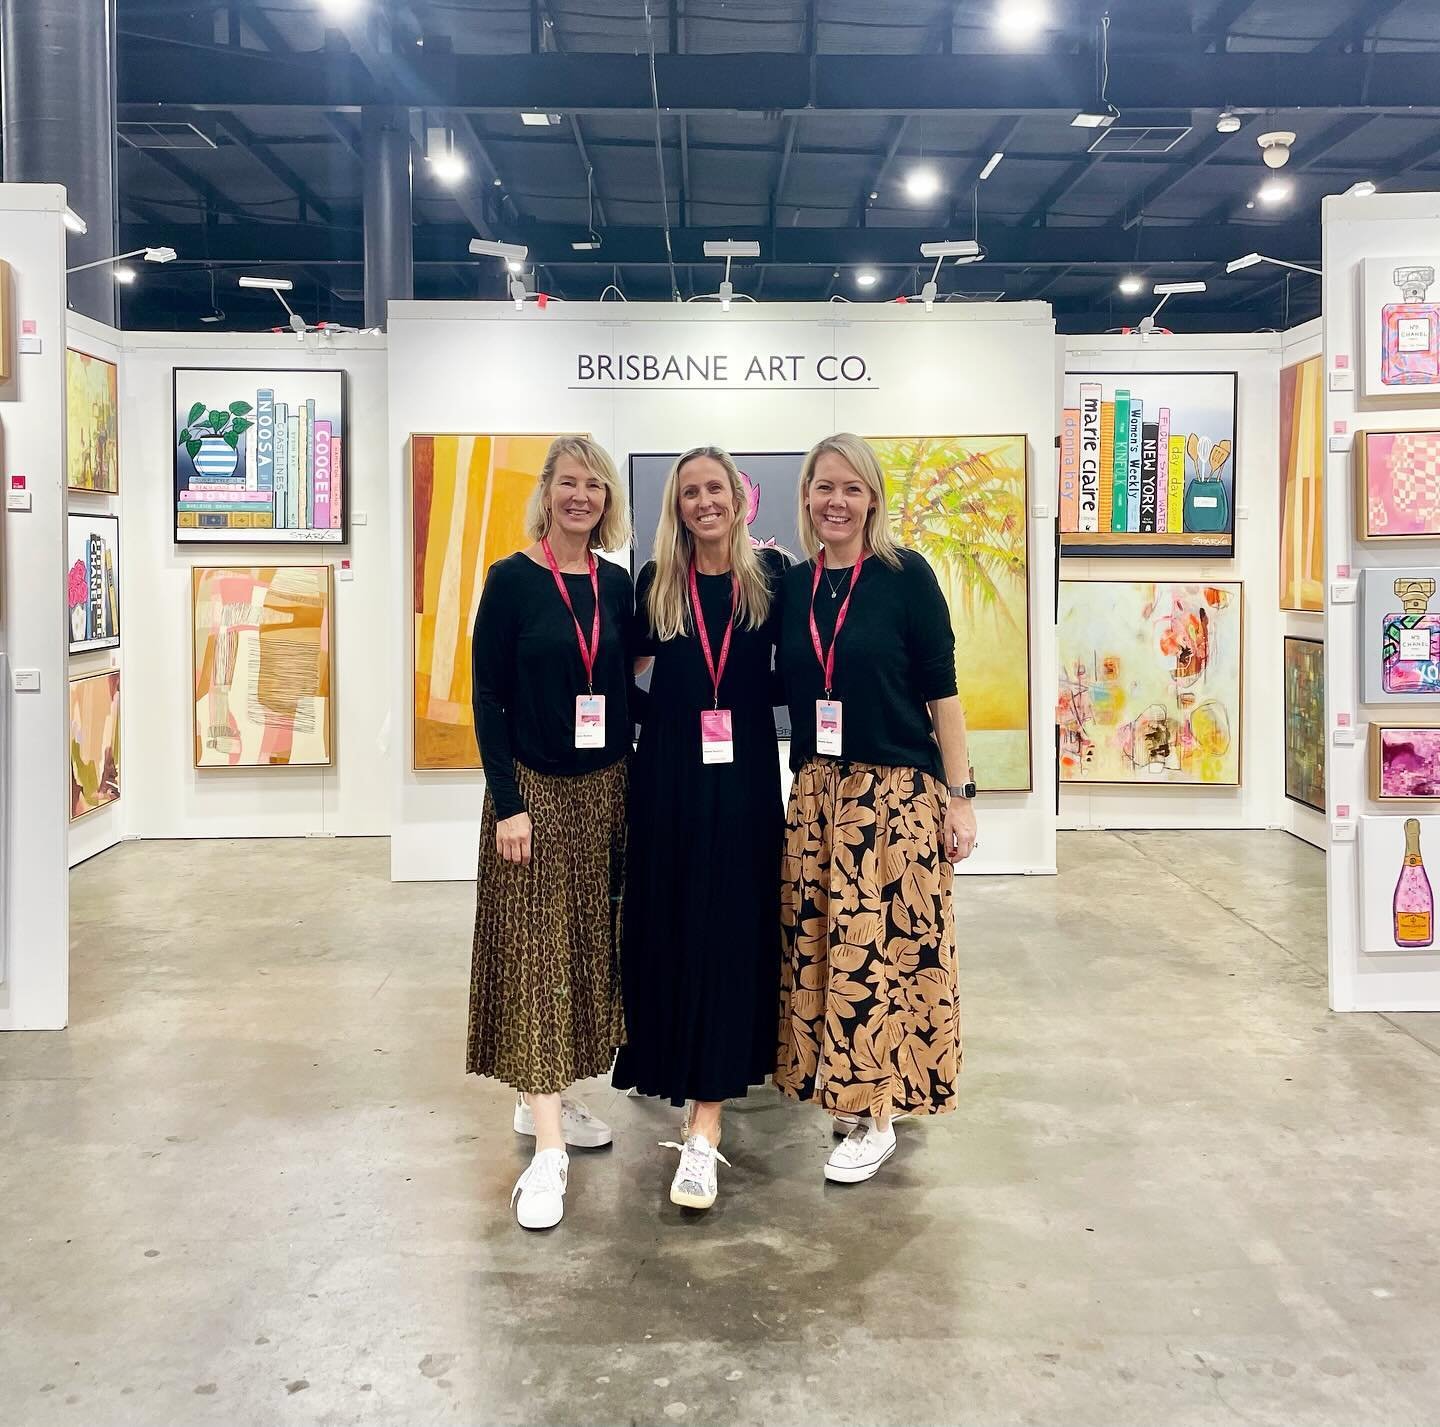 First day was huge and special @affordableartfairau with my @brisbaneartco 🩷

We all had a blast and want to say thank you Brissy and all our friends and clients who came along to support us!!! Lots of connecting, laughing, sales and most importantl